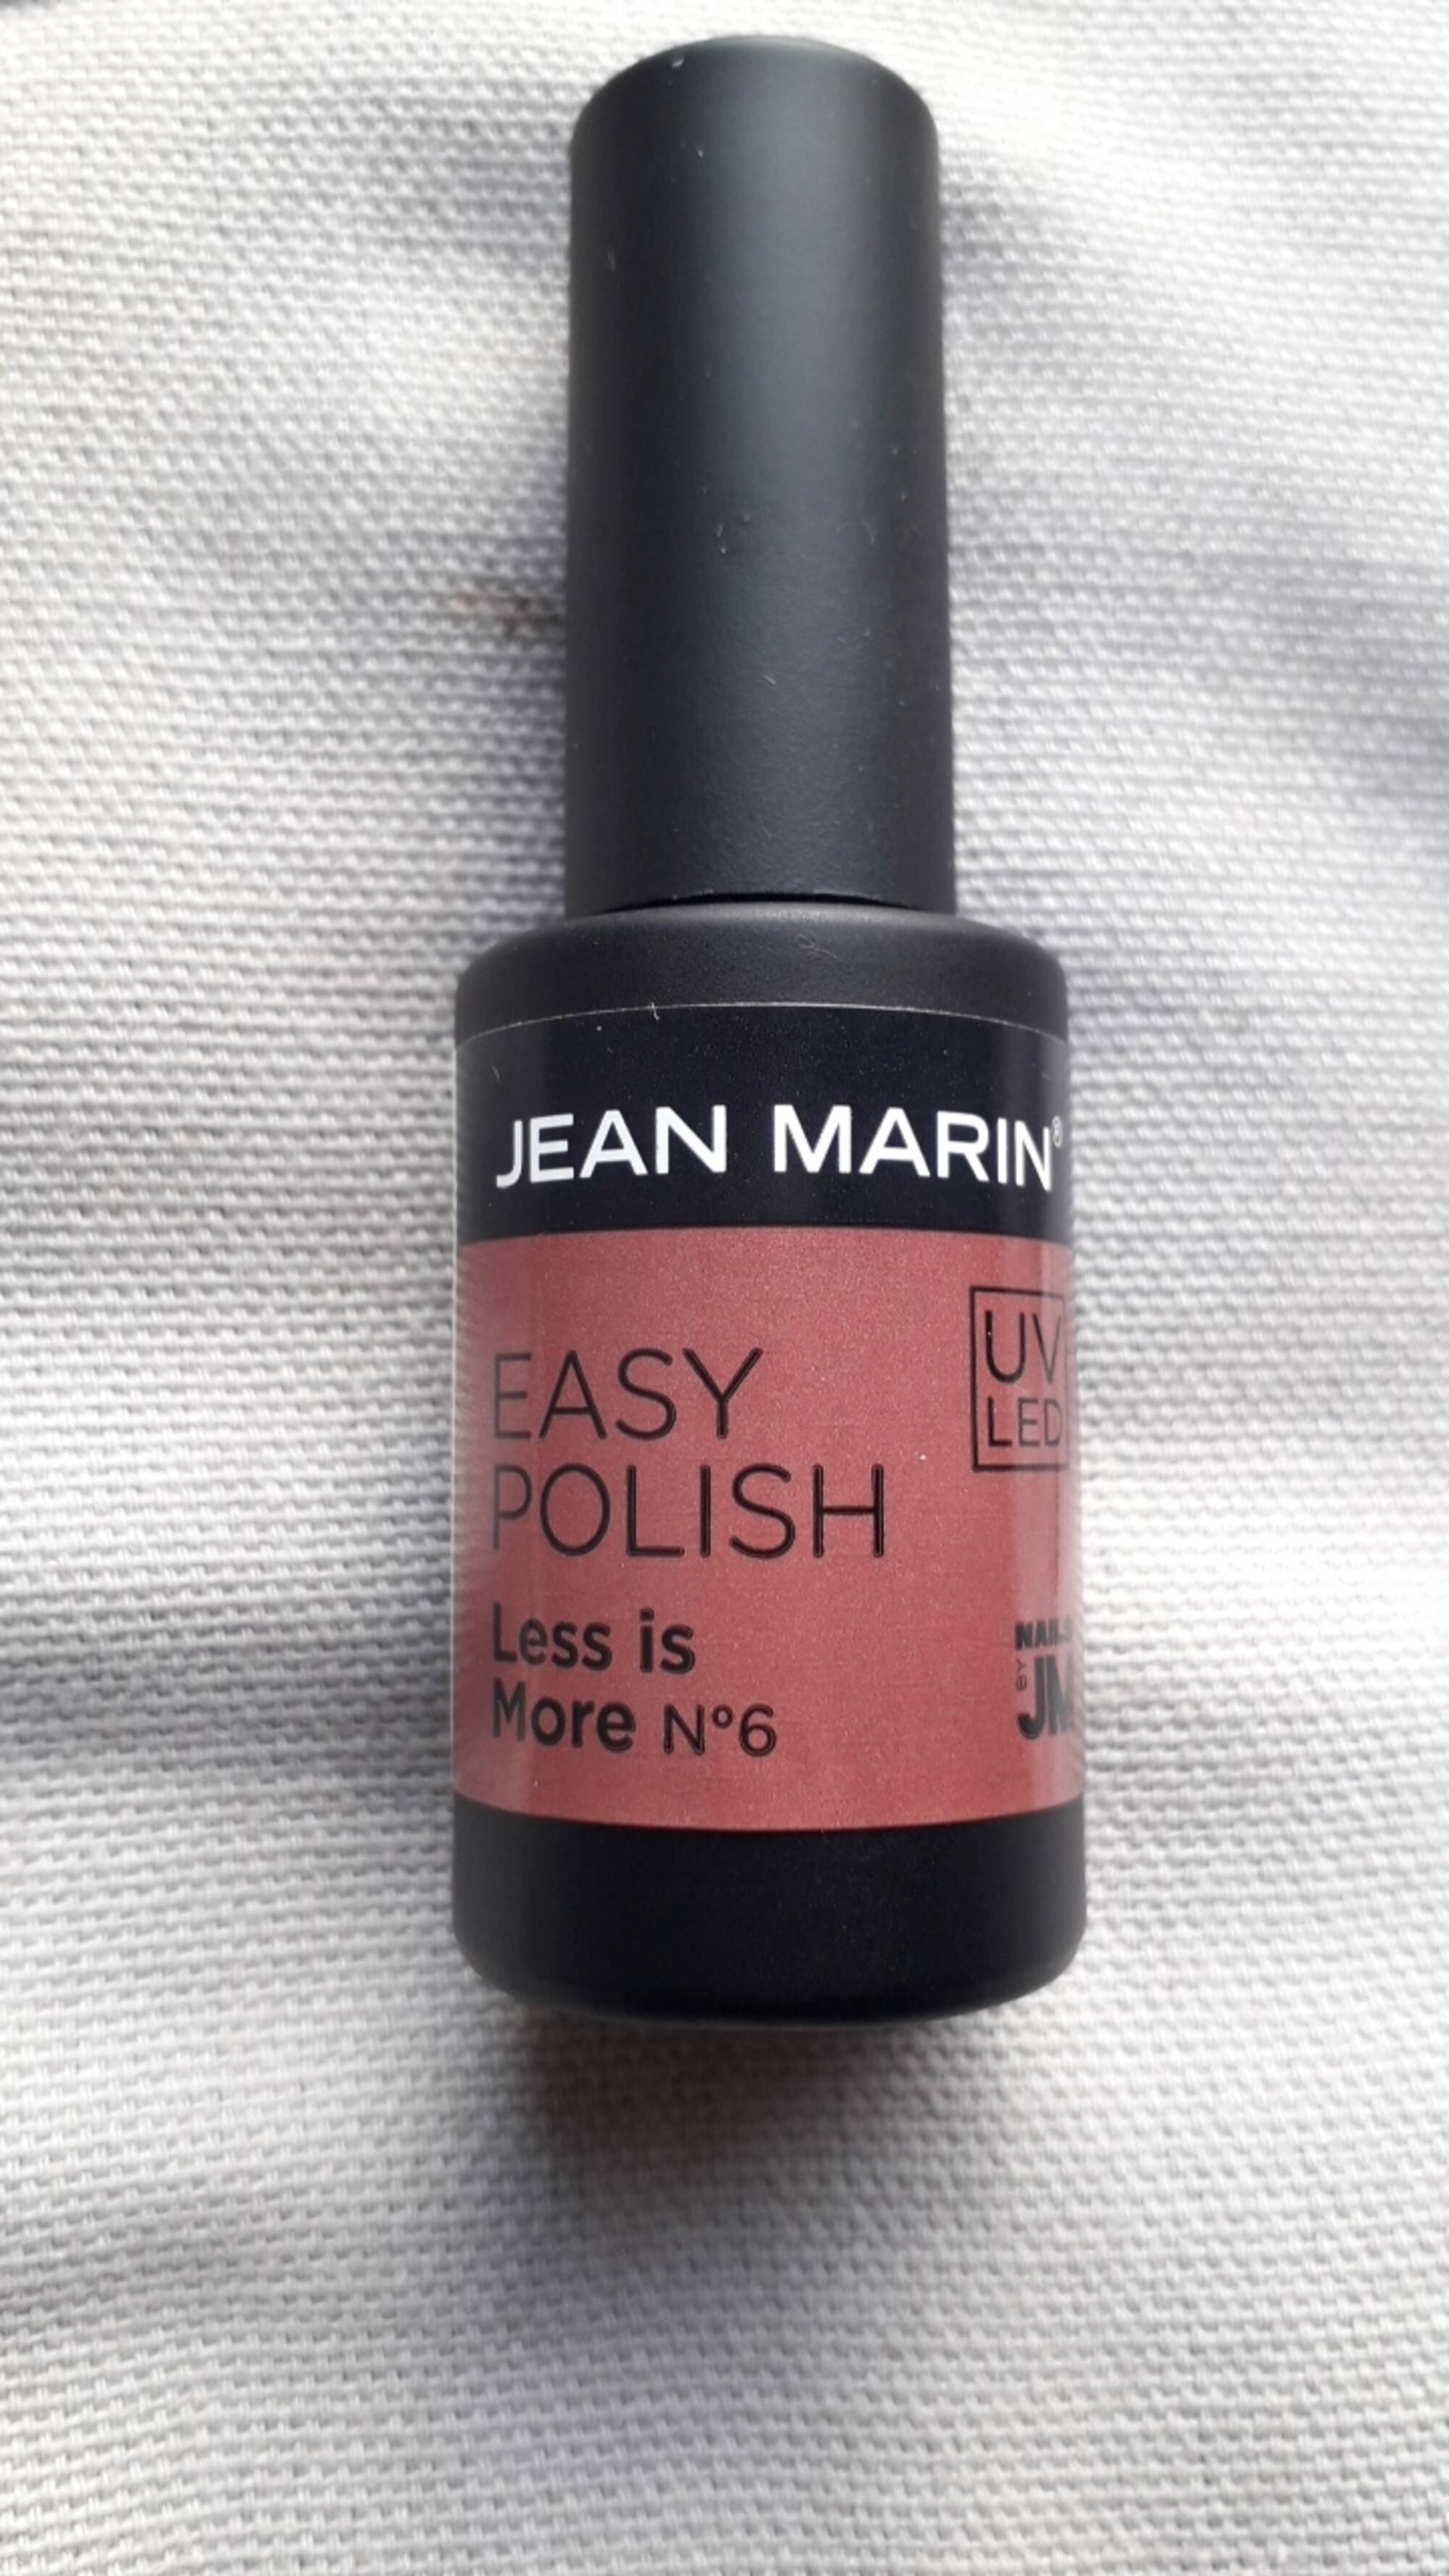 JEAN MARIN - Easy polish less is more n° 6